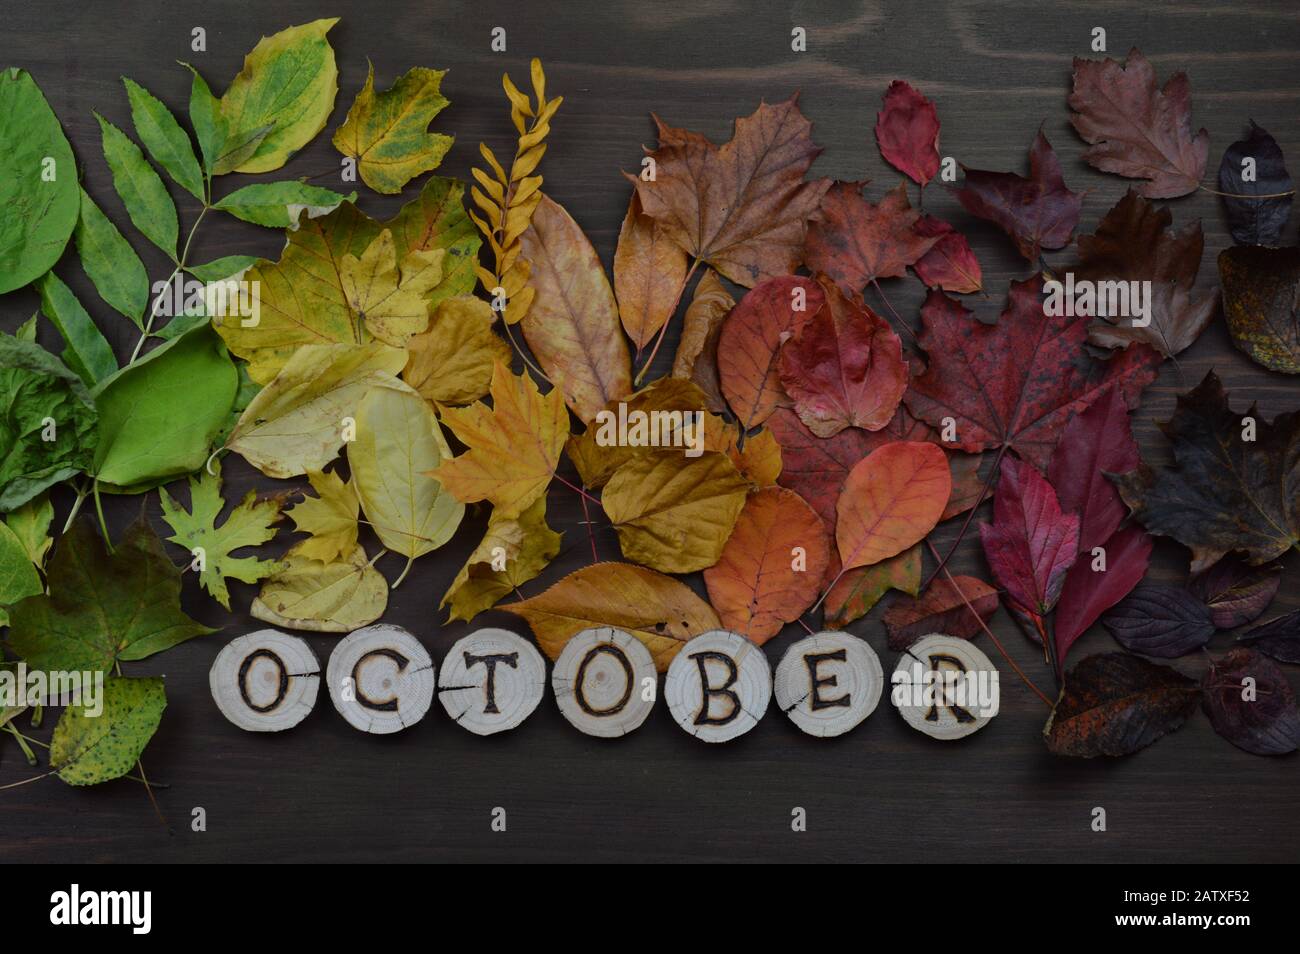 colorful autumn leaves in color gradient from green, yellow, orange, dark red to brown on wood with letters forming name of calendar month OCTOBER Stock Photo